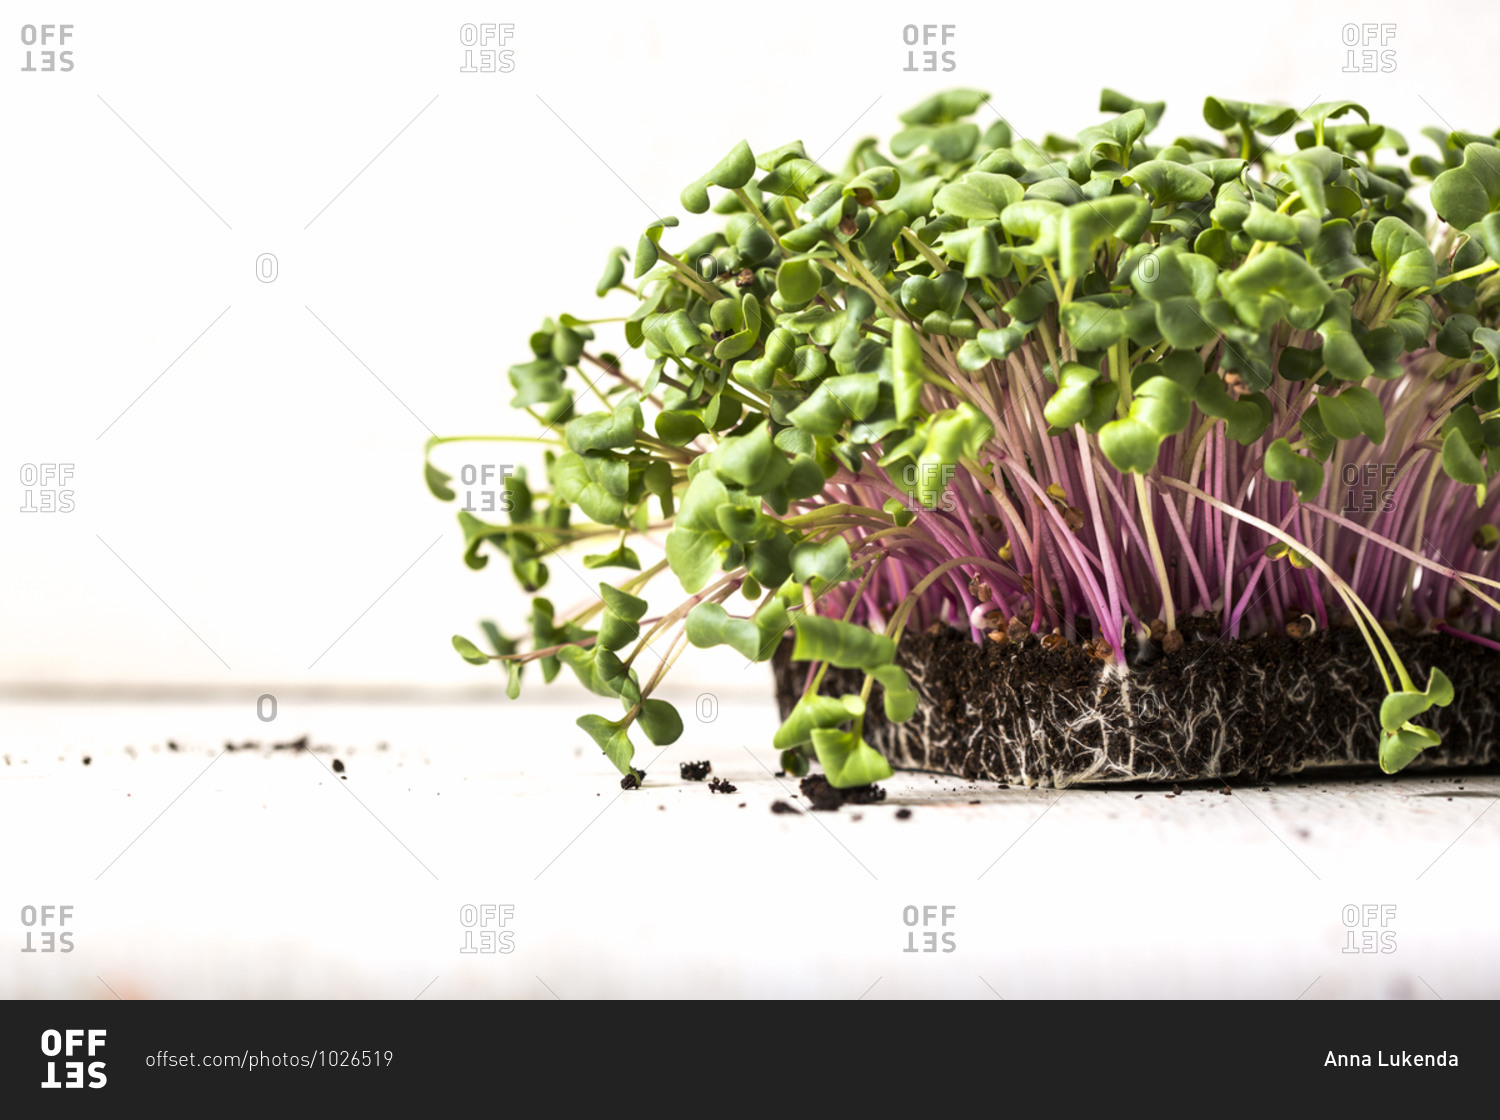 Microgreens growing in dirt on white background